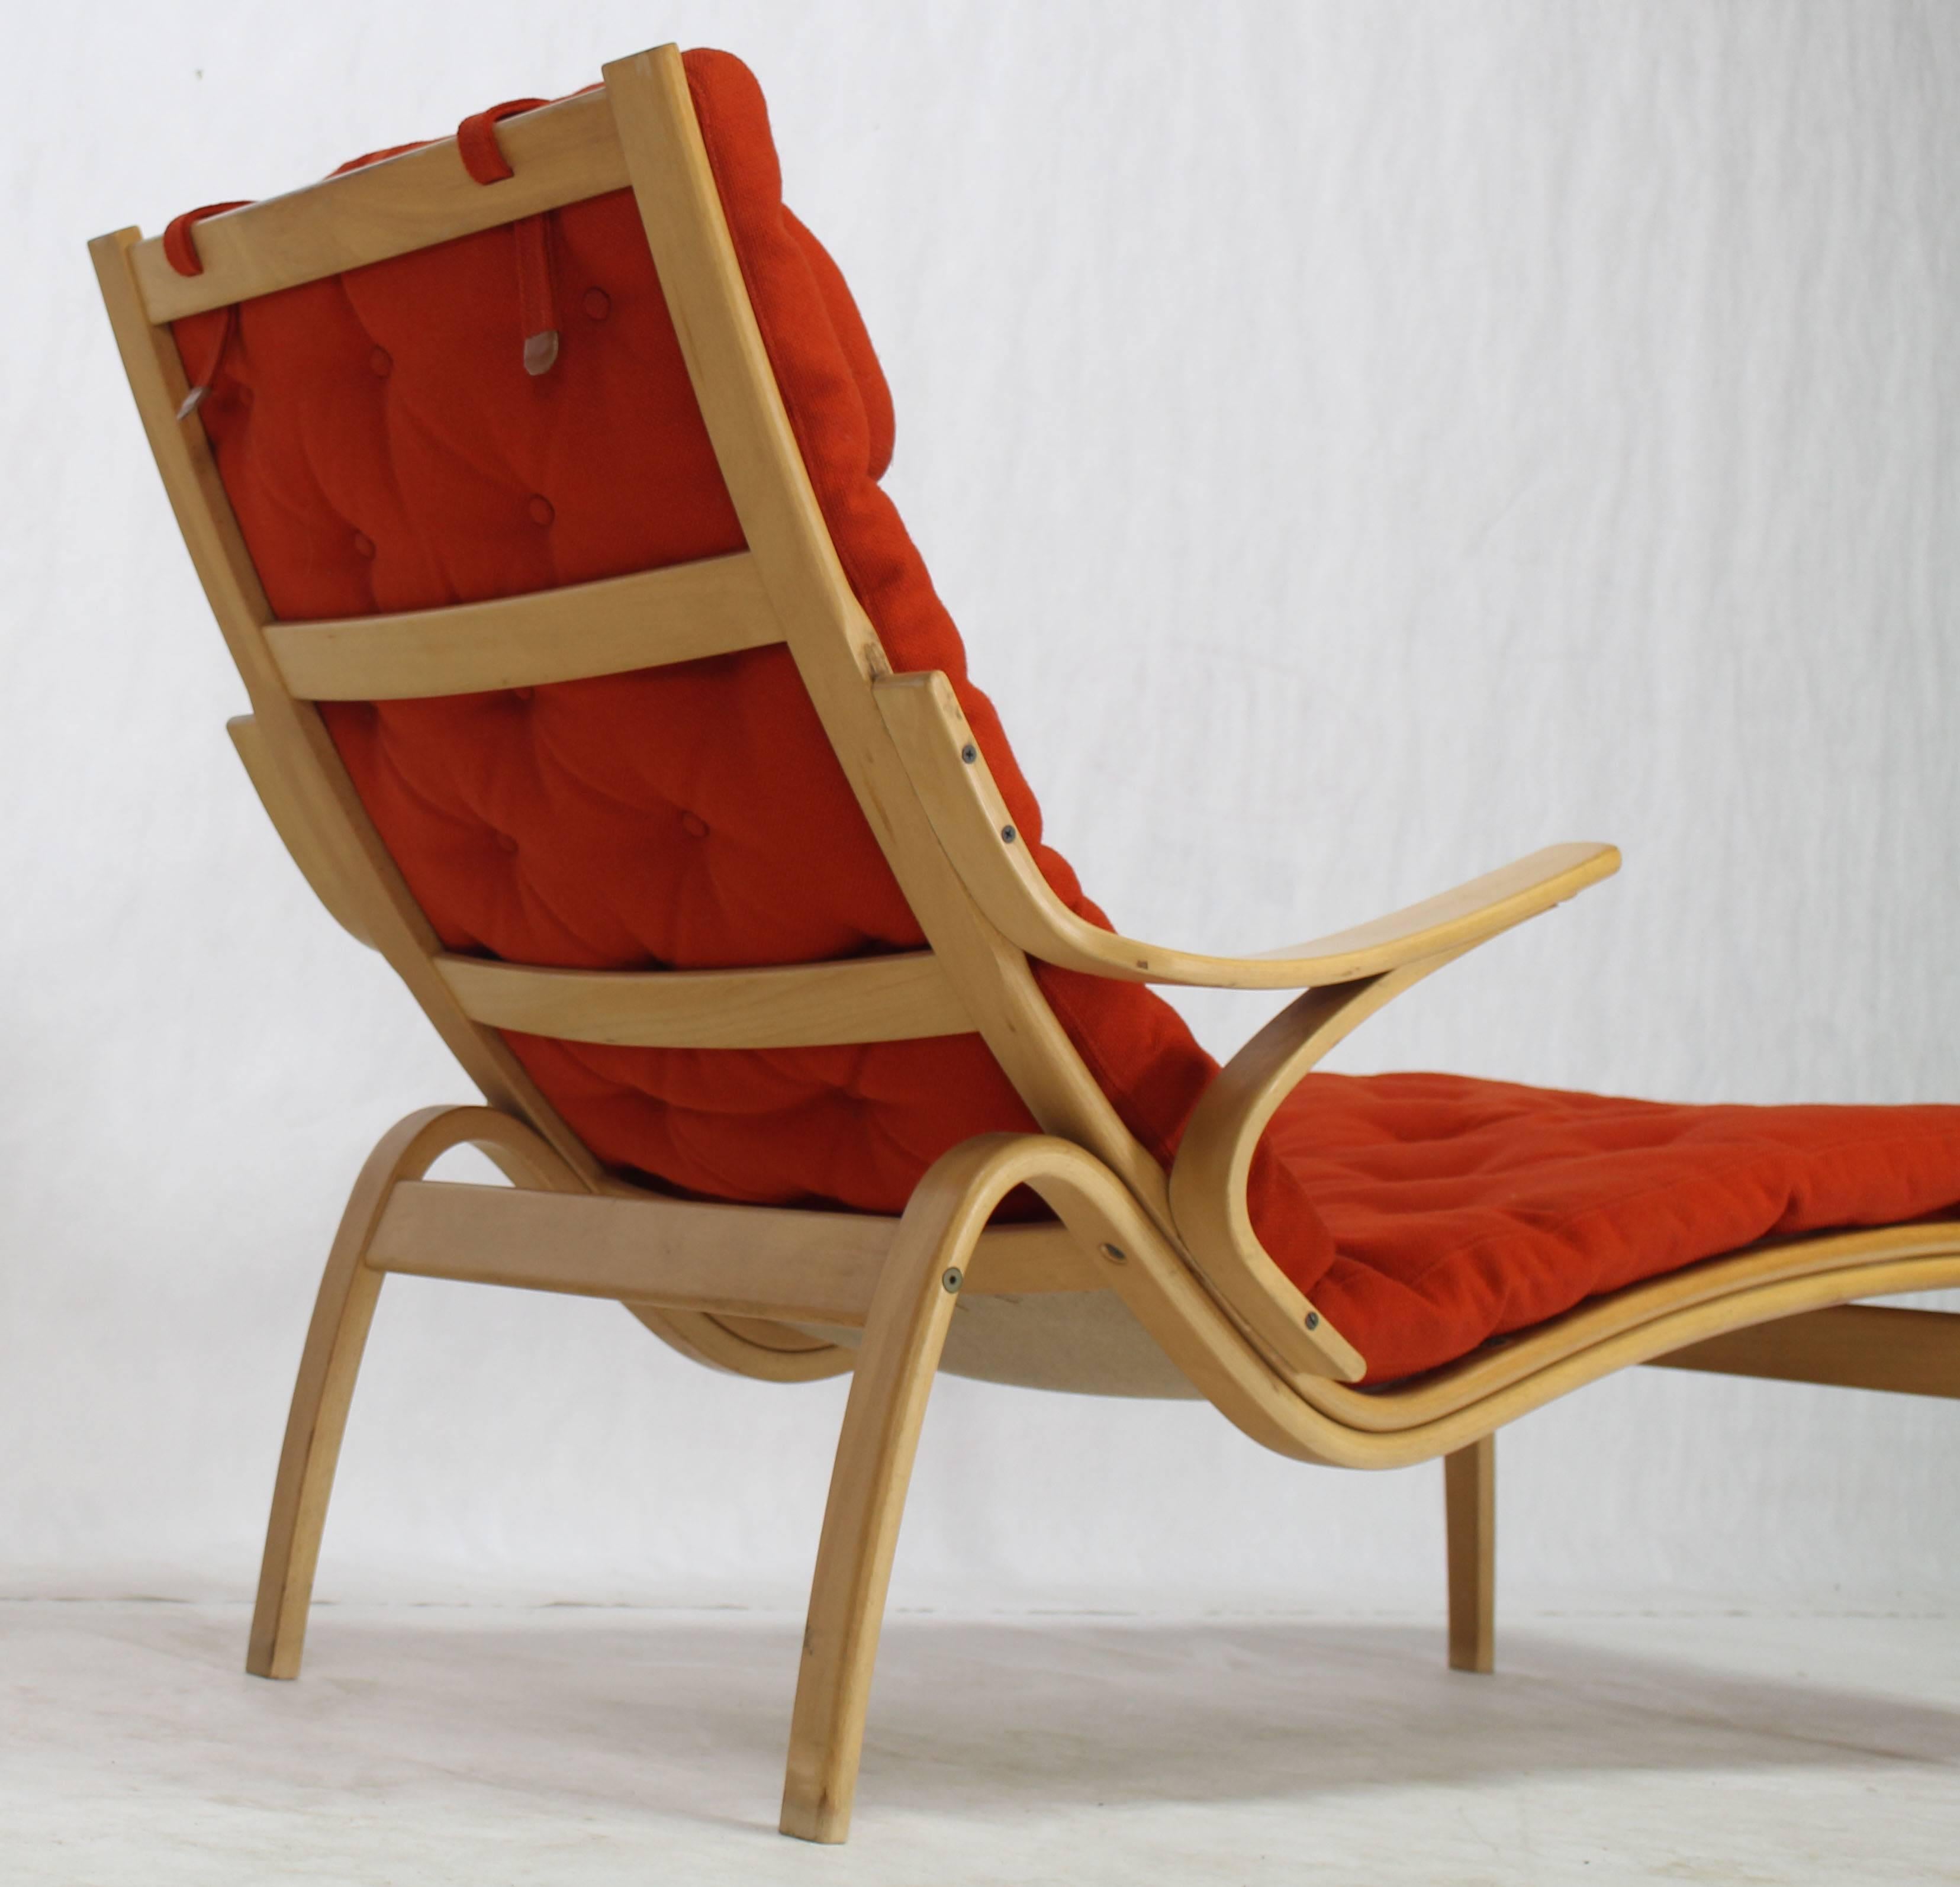 Bentwood Wool Upholstery Chaise Lounge Chair by Alvar Aalto for Artek  In Excellent Condition For Sale In Rockaway, NJ